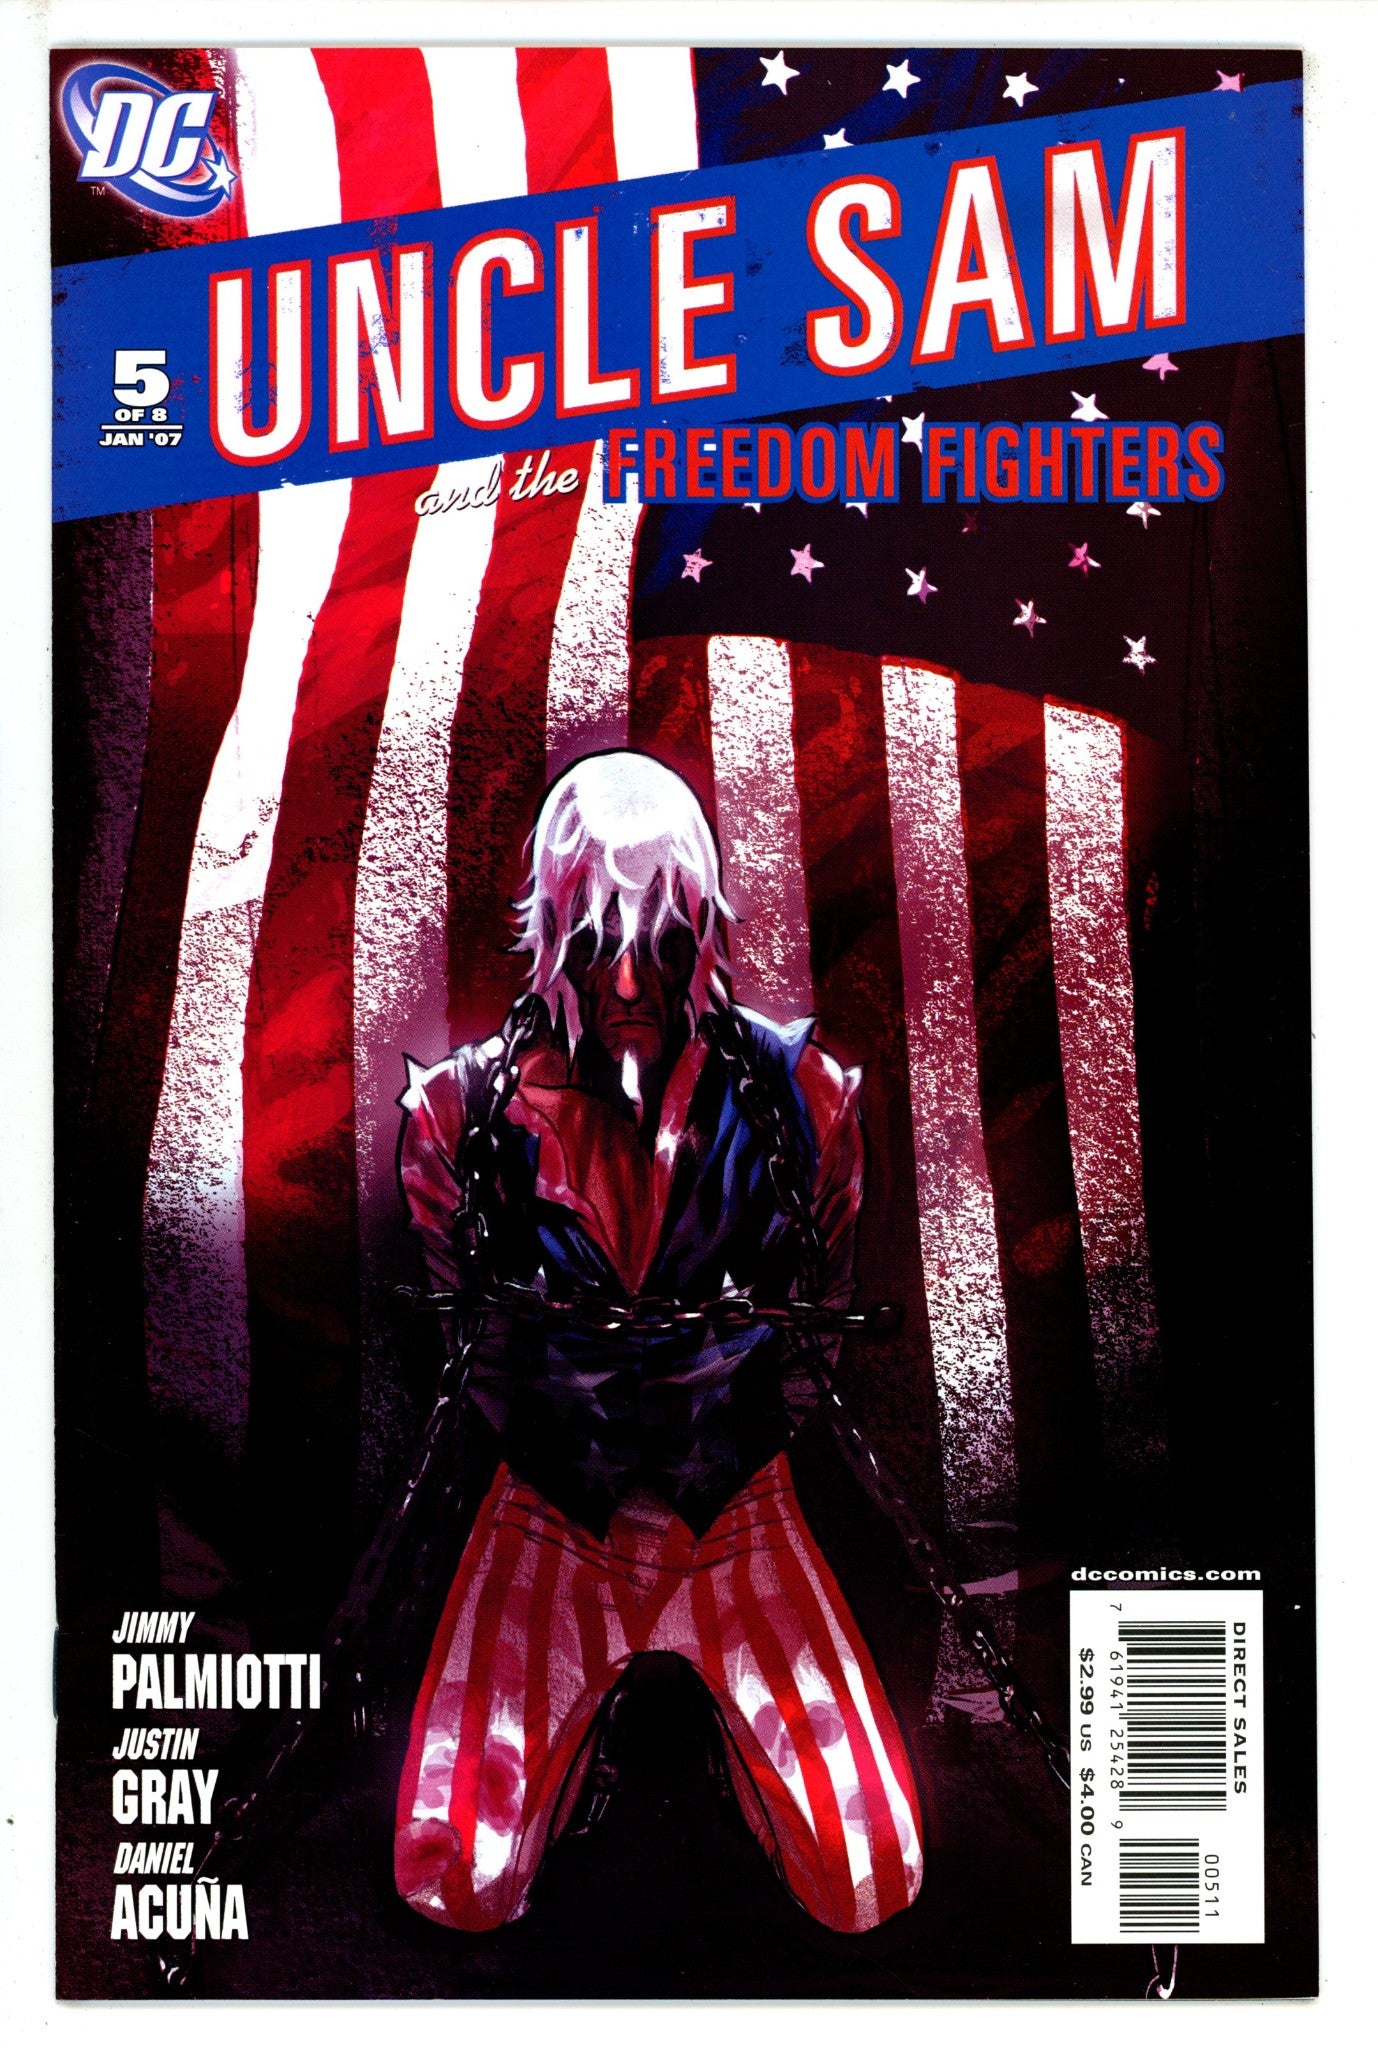 Uncle Sam and the Freedom Fighters Vol 1 5 (2006)